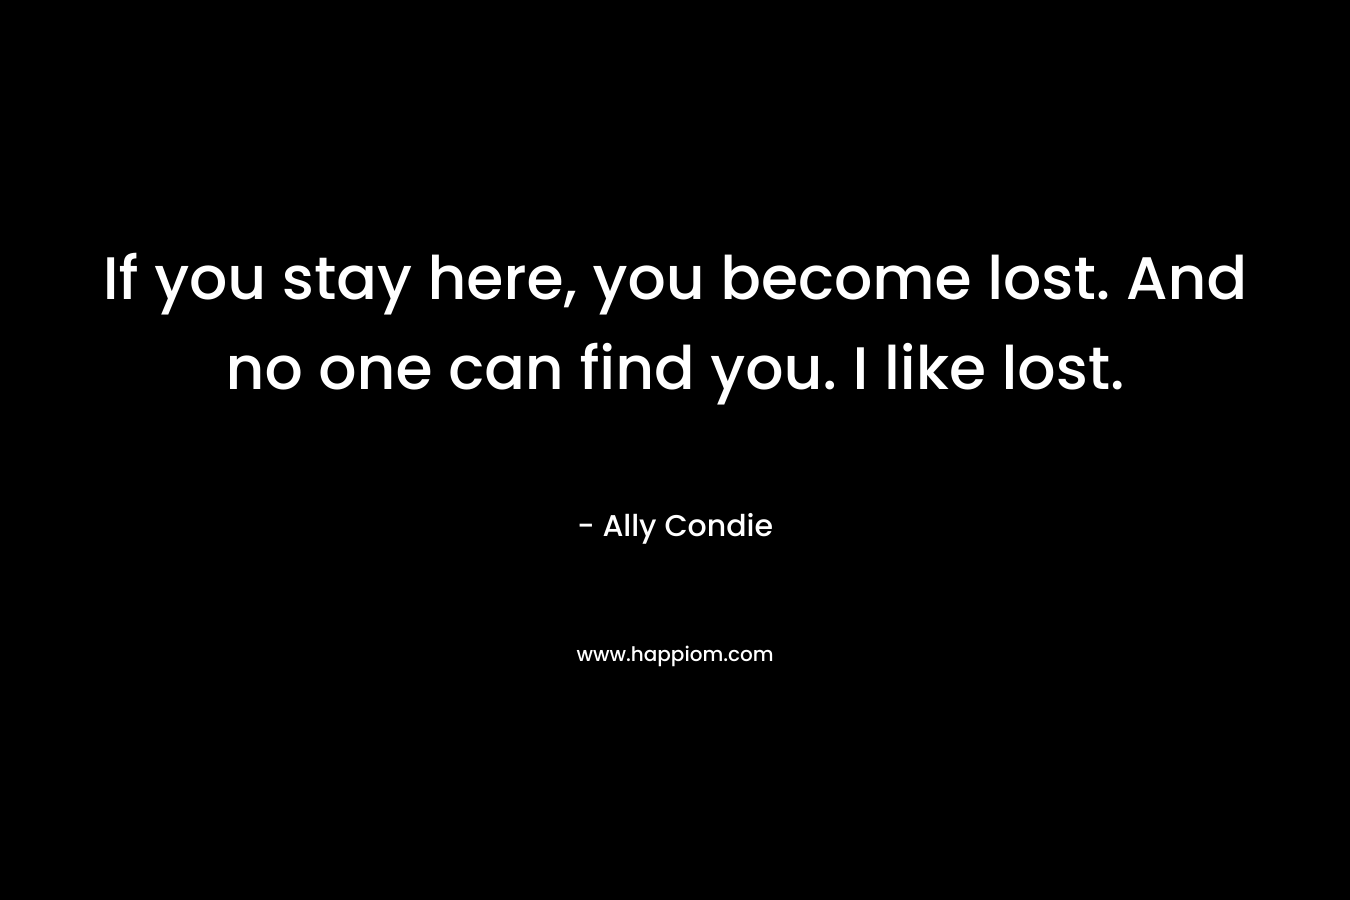 If you stay here, you become lost. And no one can find you. I like lost. – Ally Condie